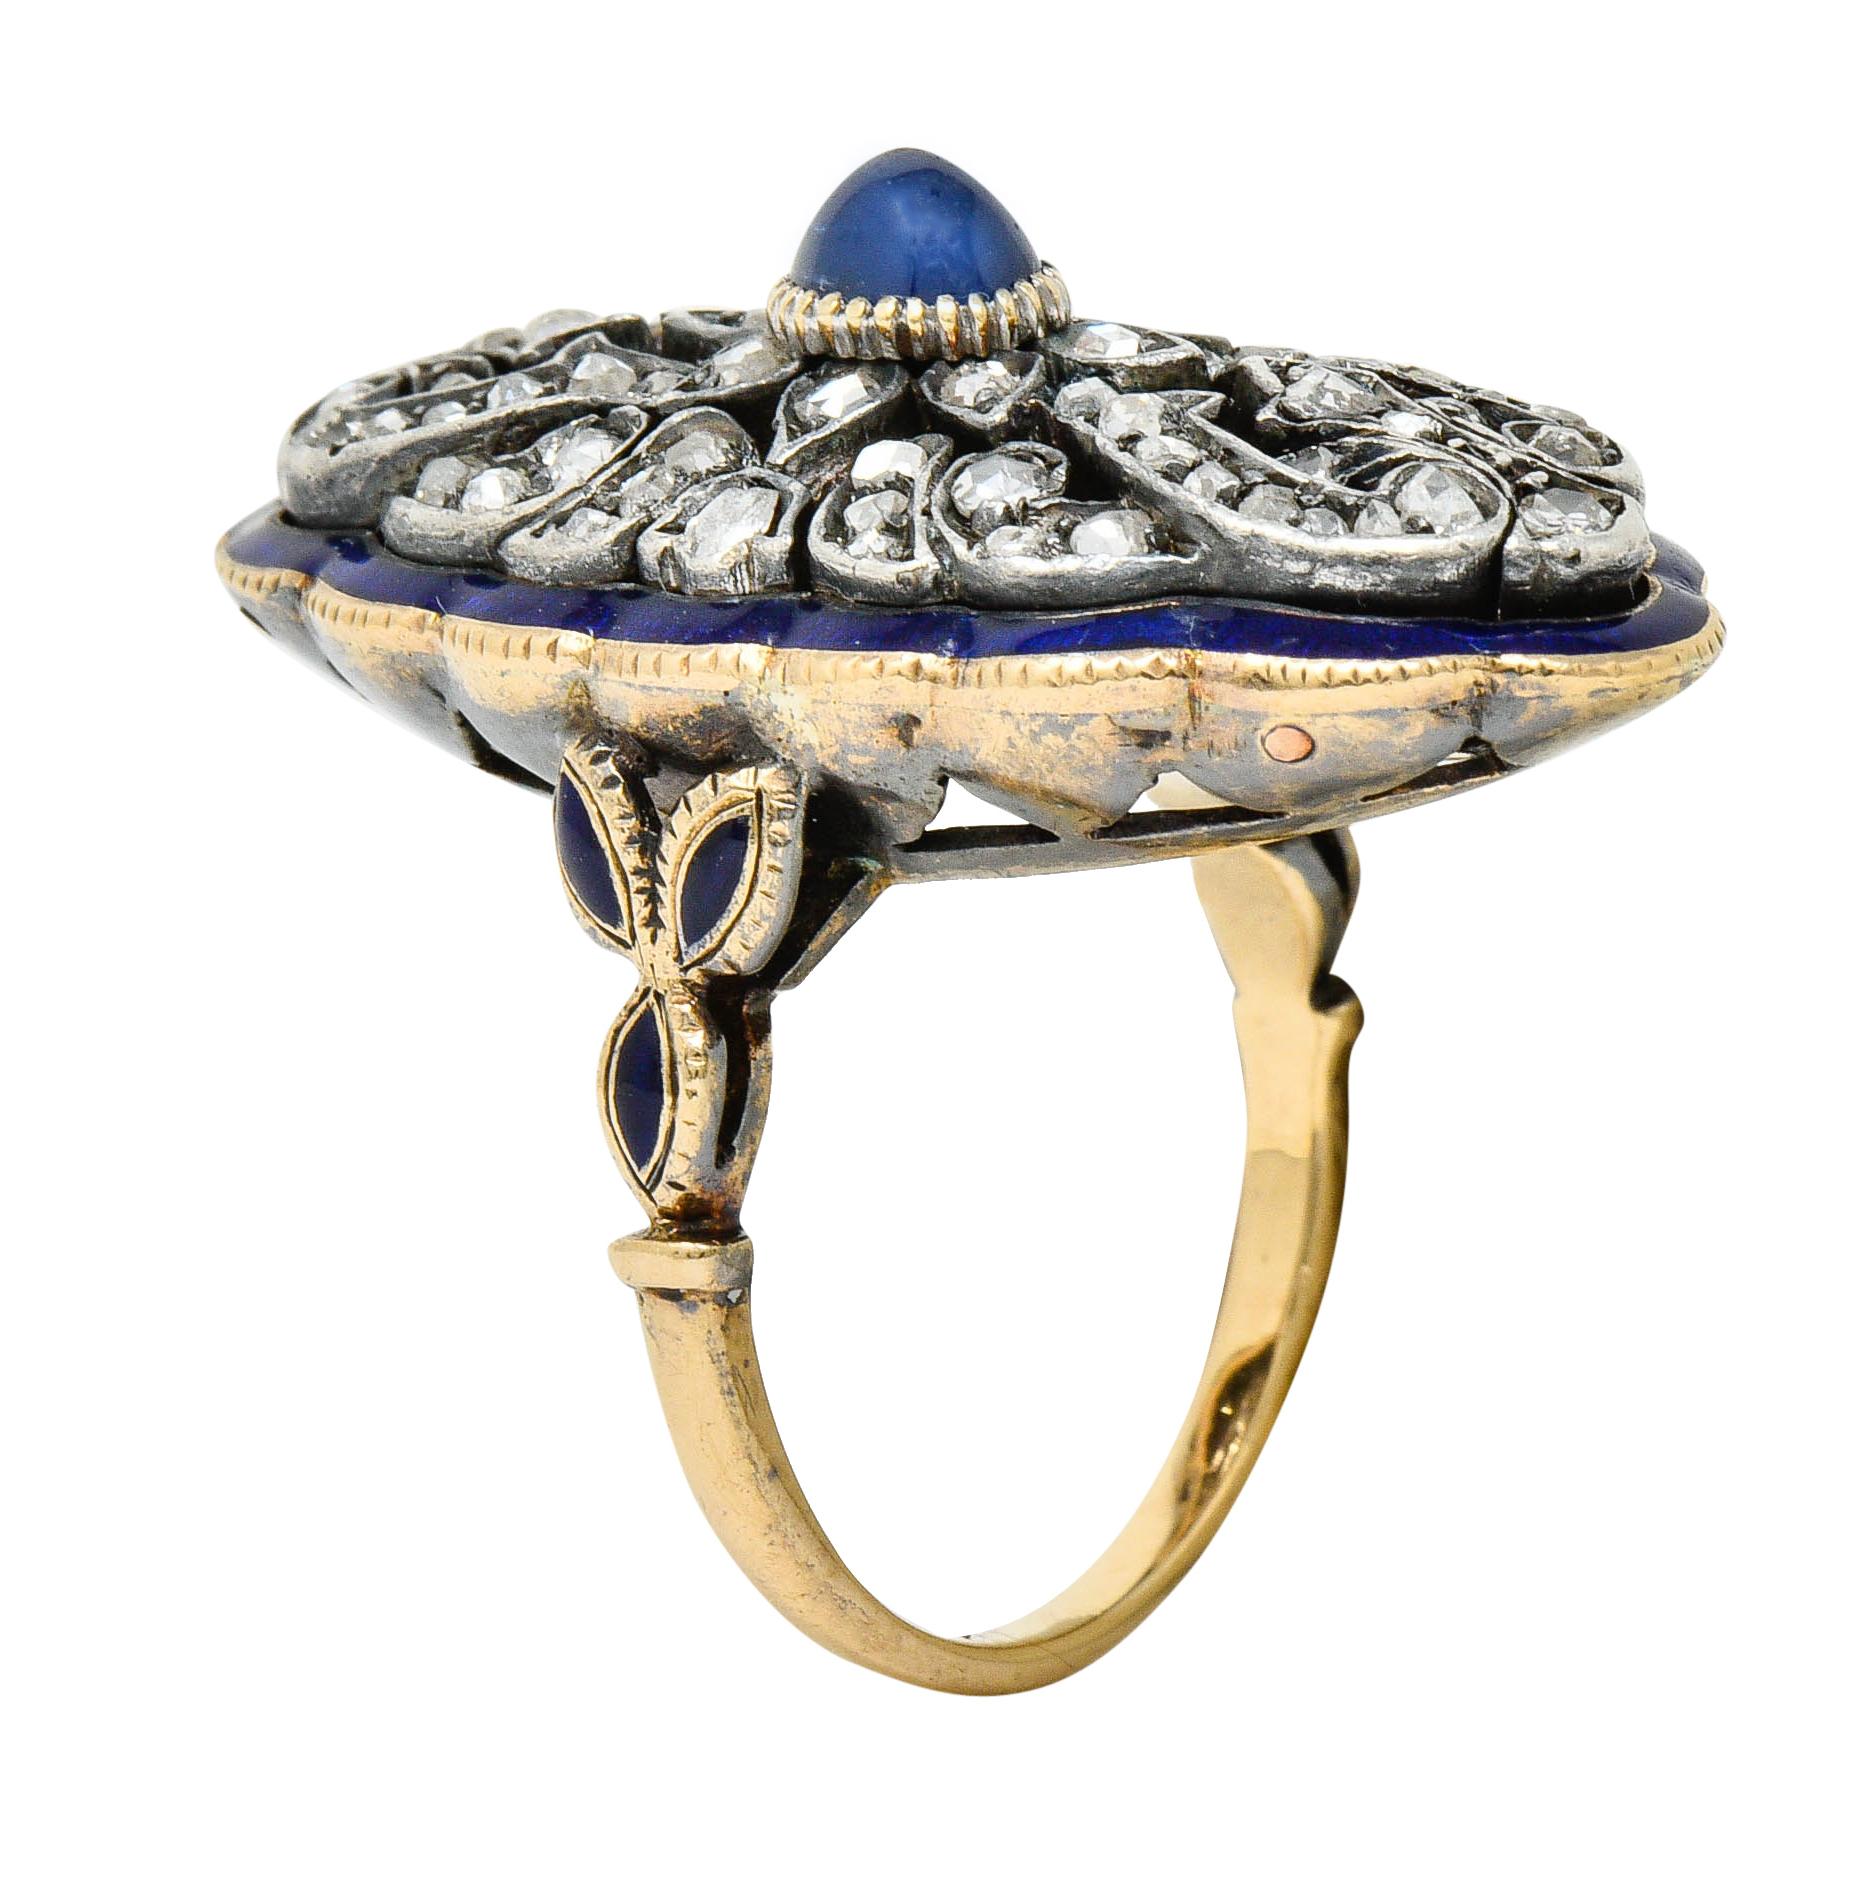 Decorative dinner ring centers an oval sapphire cabochon weighing approximately 0.72 carat

Surrounded by a flourishing silver design accented by rose cut diamonds

With a royal blue enamel border and foliate shoulders; well-matched to sapphire and